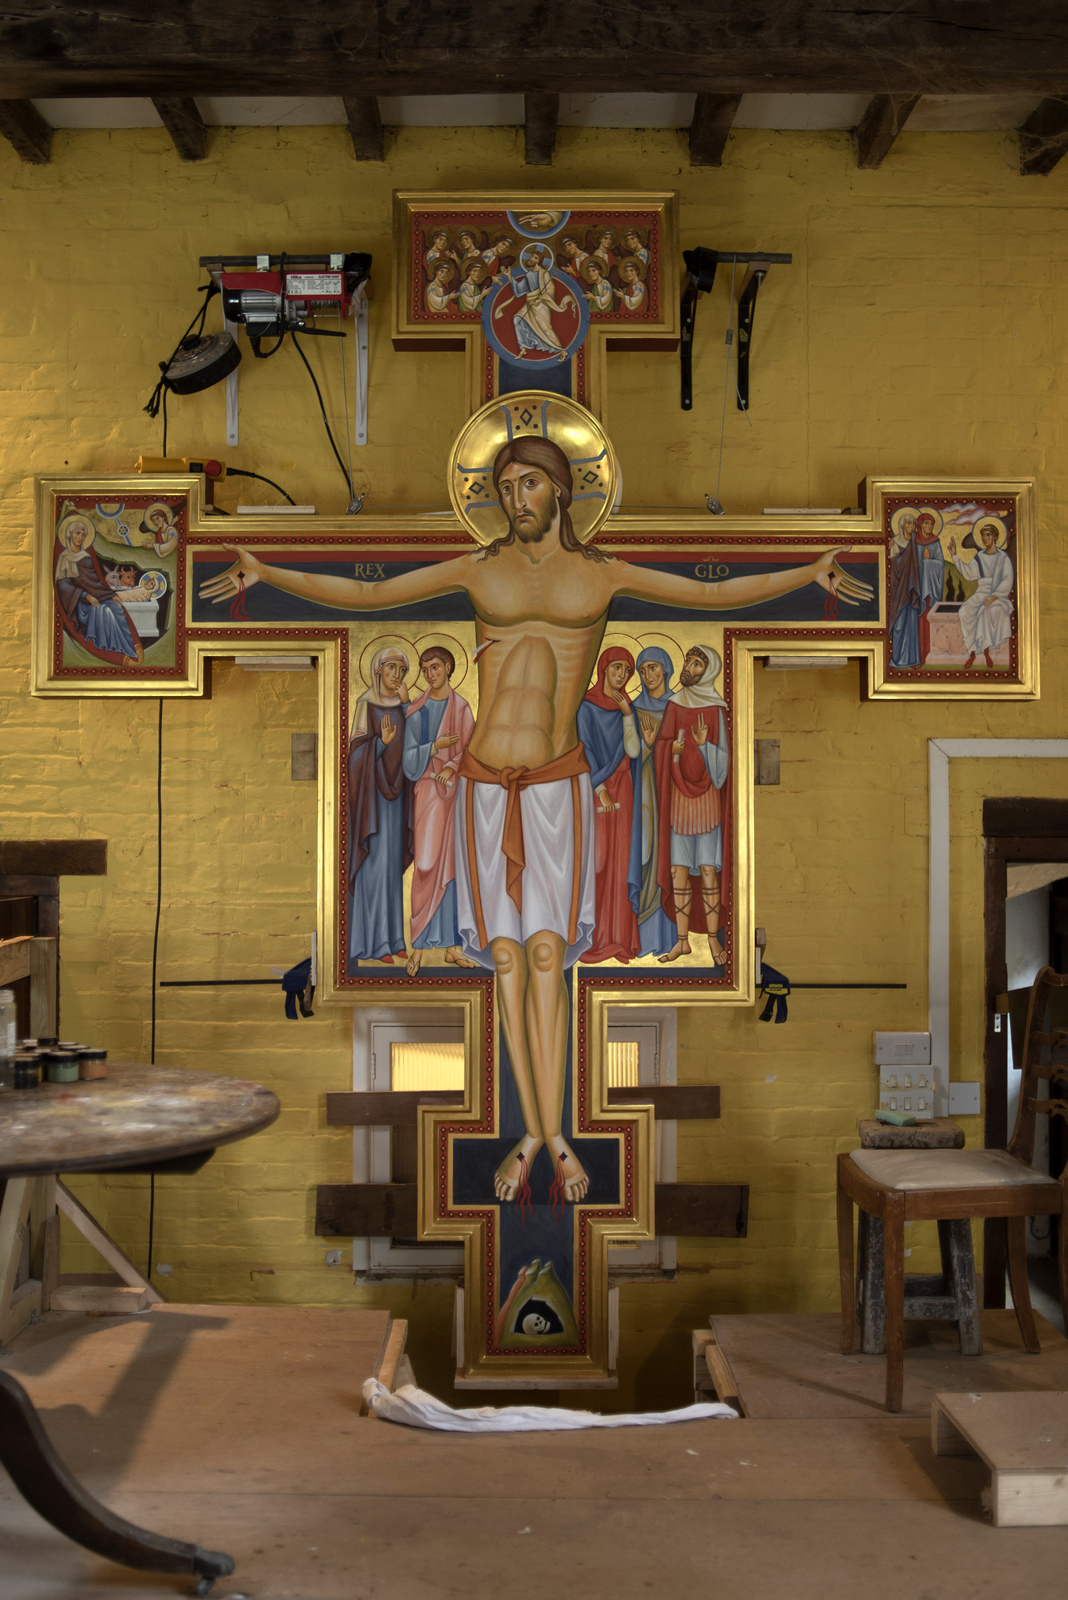 10 x 8 foot crucifix of Christ, traditional ‘egg tempera’ technique built up in thin layers over a timber panel. The background is in burnished gold